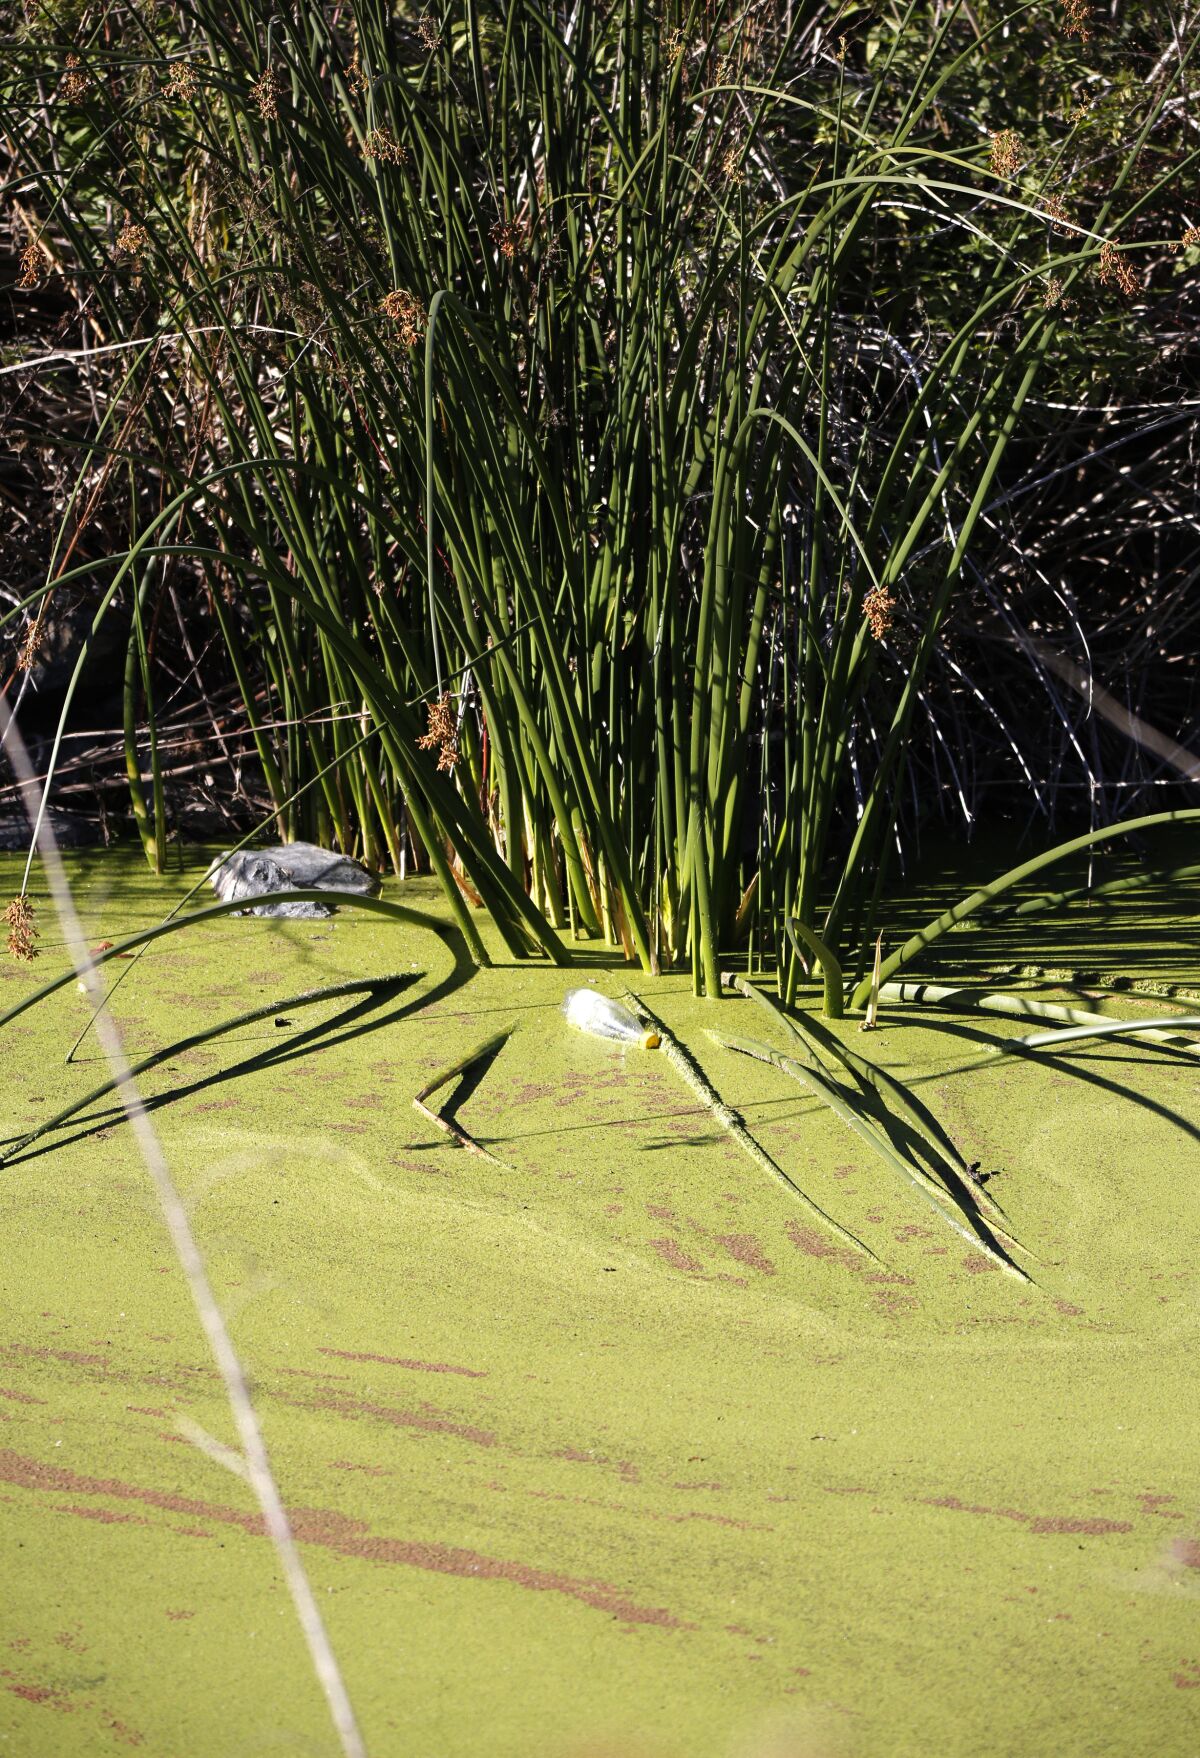 A close up of green algae and litter in a pond